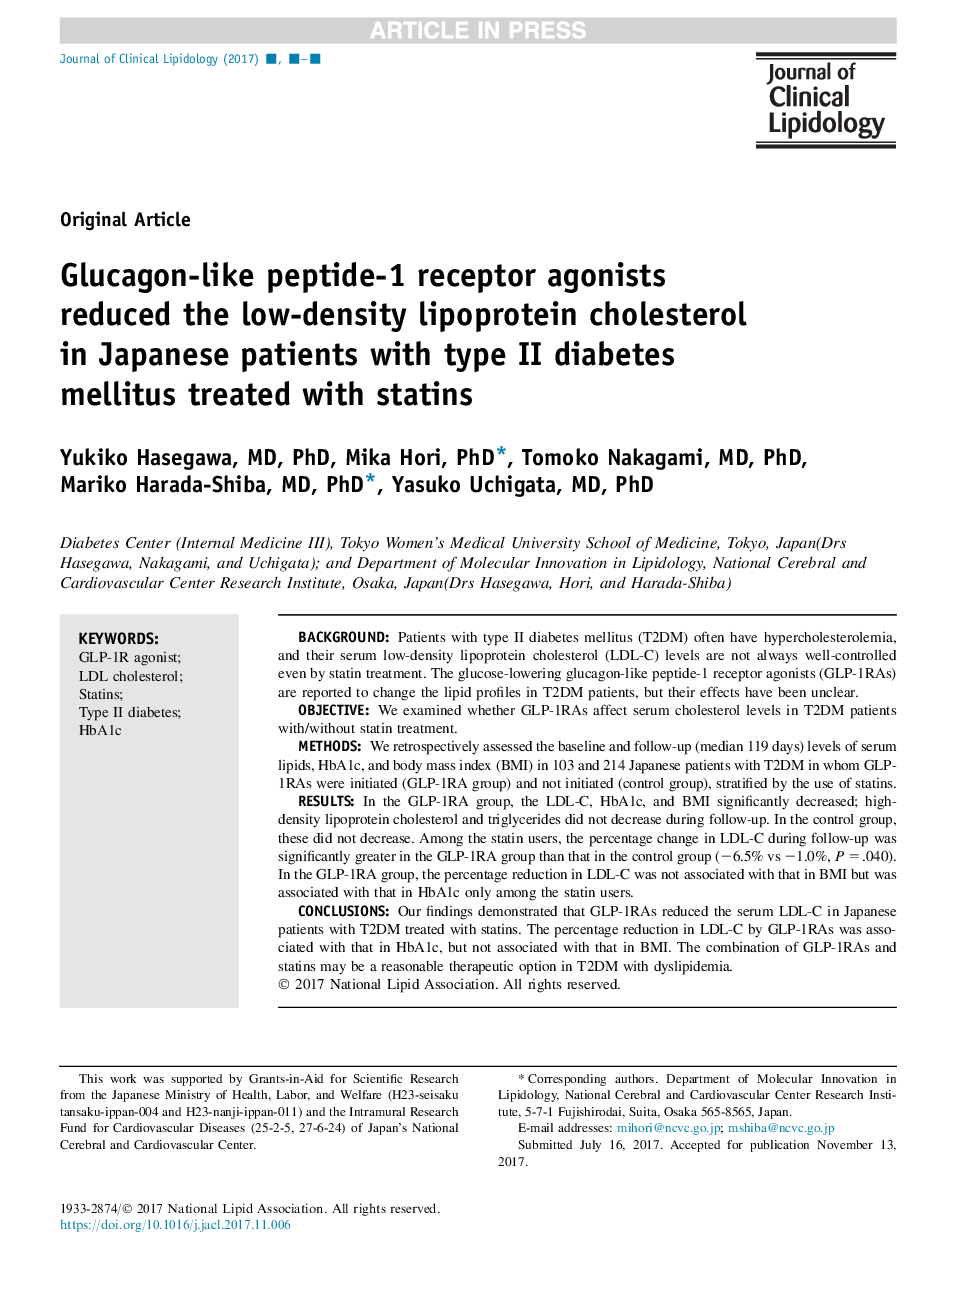 Glucagon-like peptide-1 receptor agonists reduced the low-density lipoprotein cholesterol in Japanese patients with type 2 diabetes mellitus treated with statins